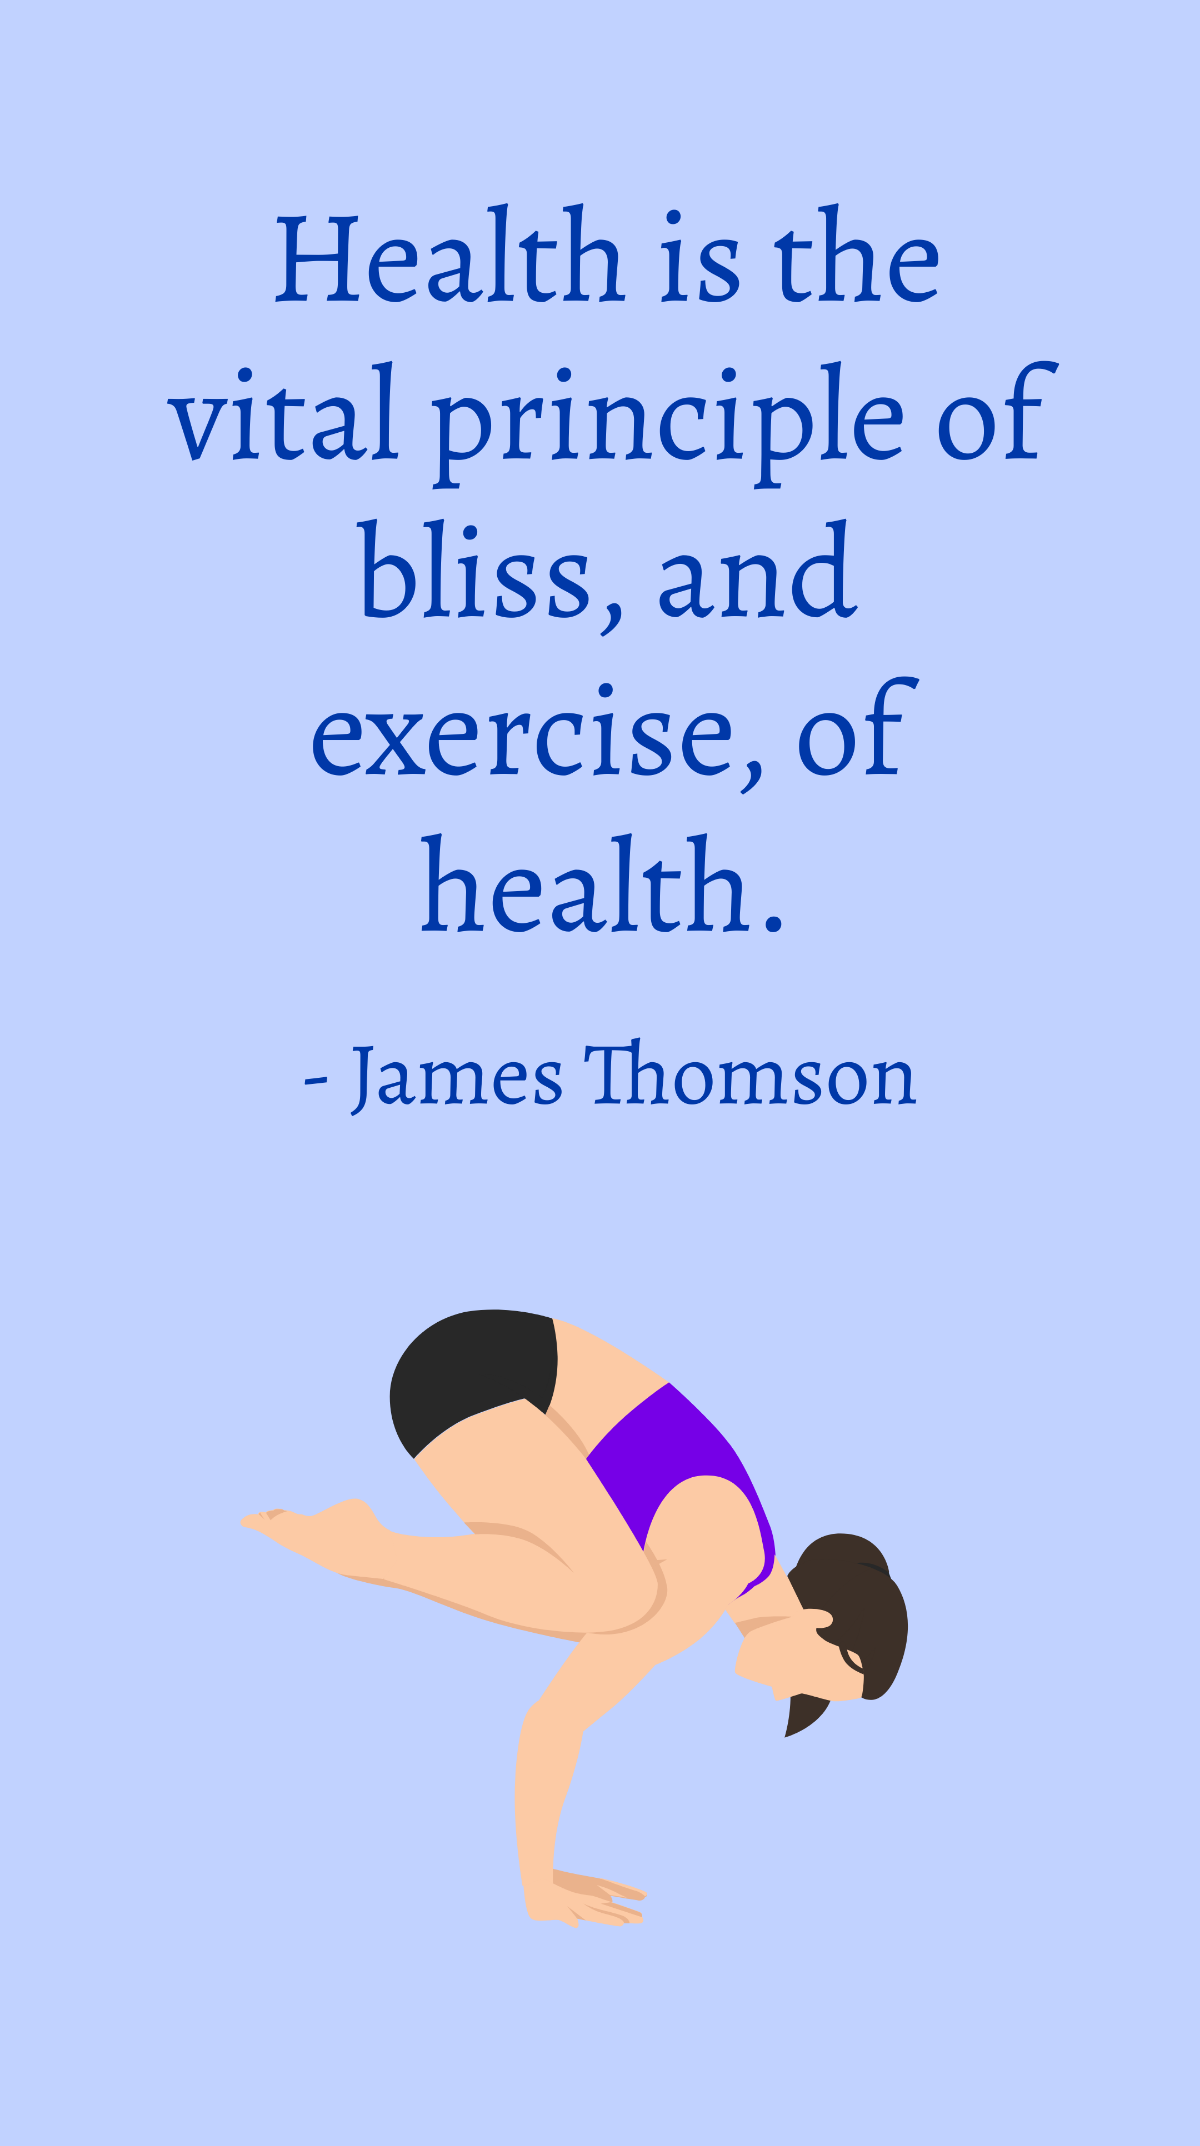 James Thomson - Health is the vital principle of bliss, and exercise, of health. - James Thomson Template